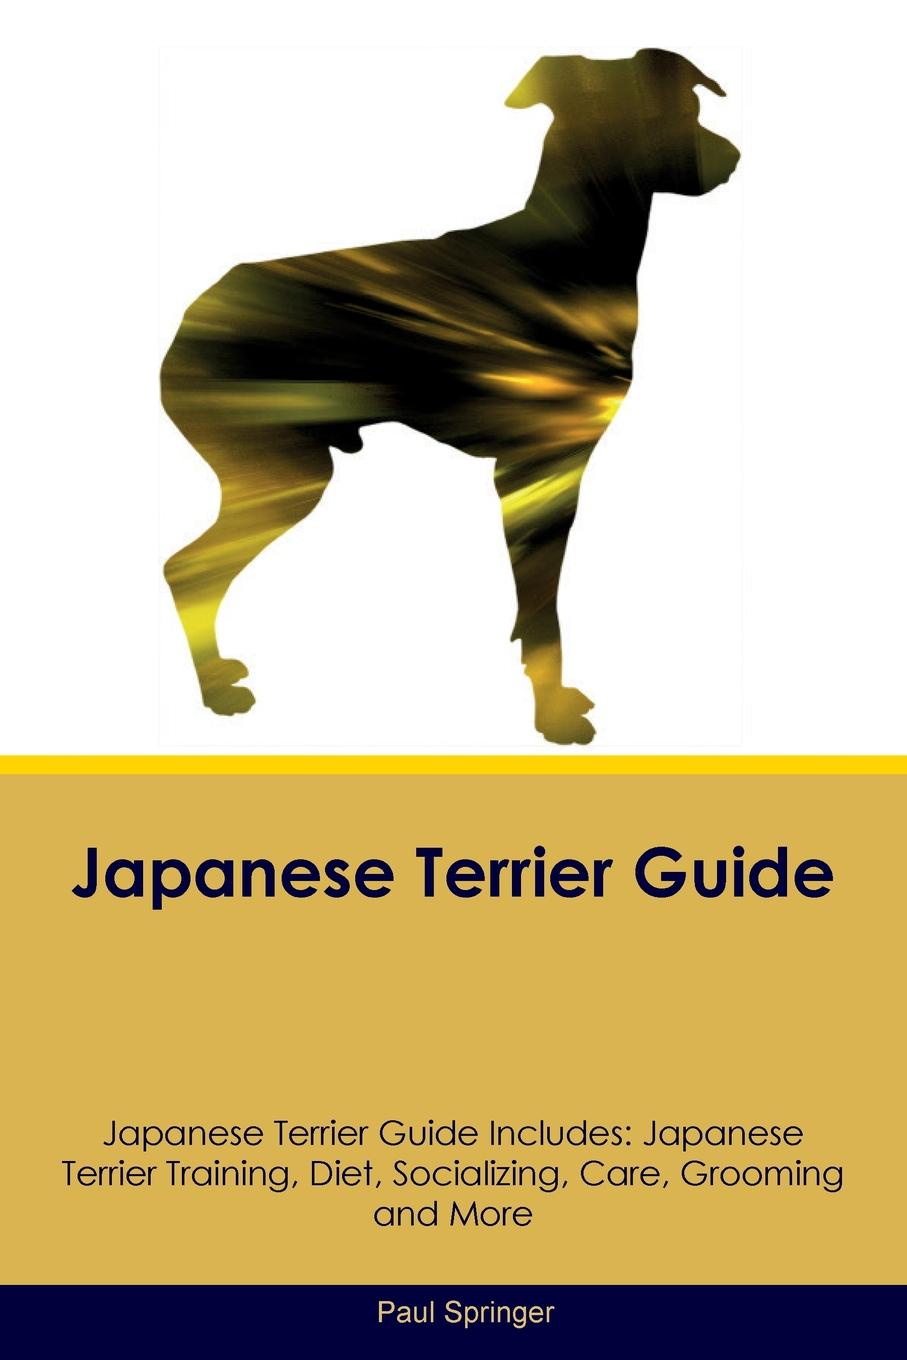 Japanese Terrier Guide Japanese Terrier Guide Includes. Japanese Terrier Training, Diet, Socializing, Care, Grooming, Breeding and More